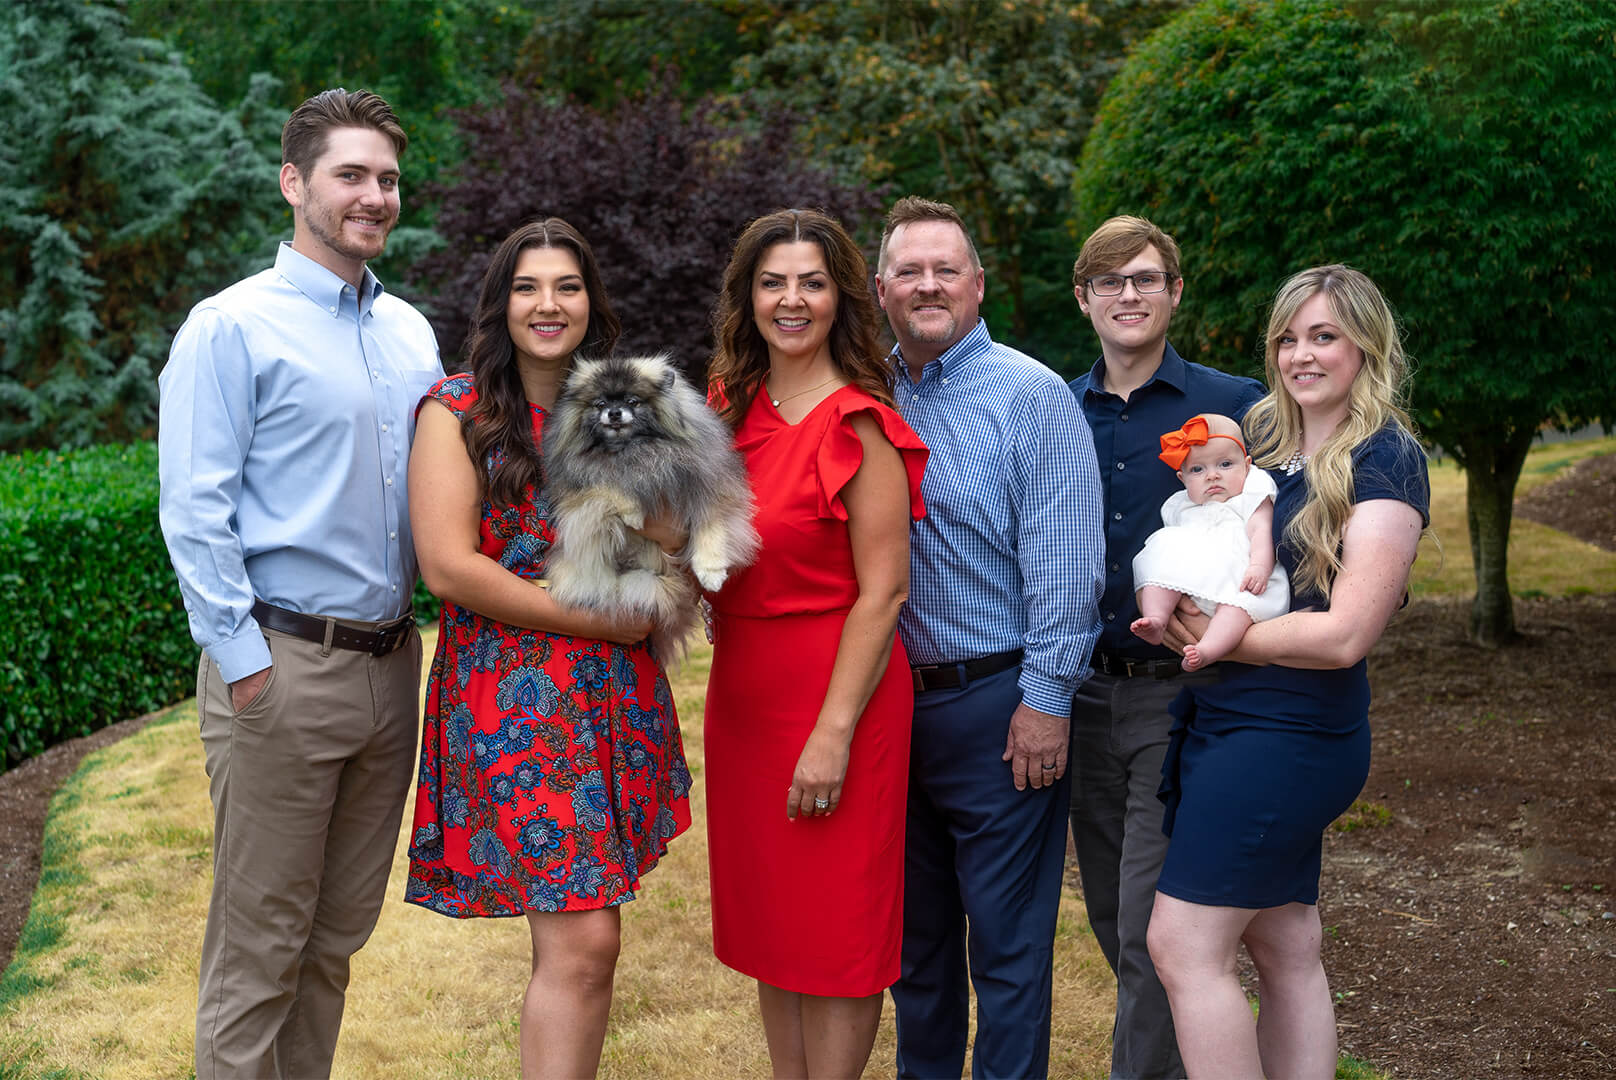 Family photo of Kelly Chambers with husband, two children and their significant others, with an infant and a dog outside